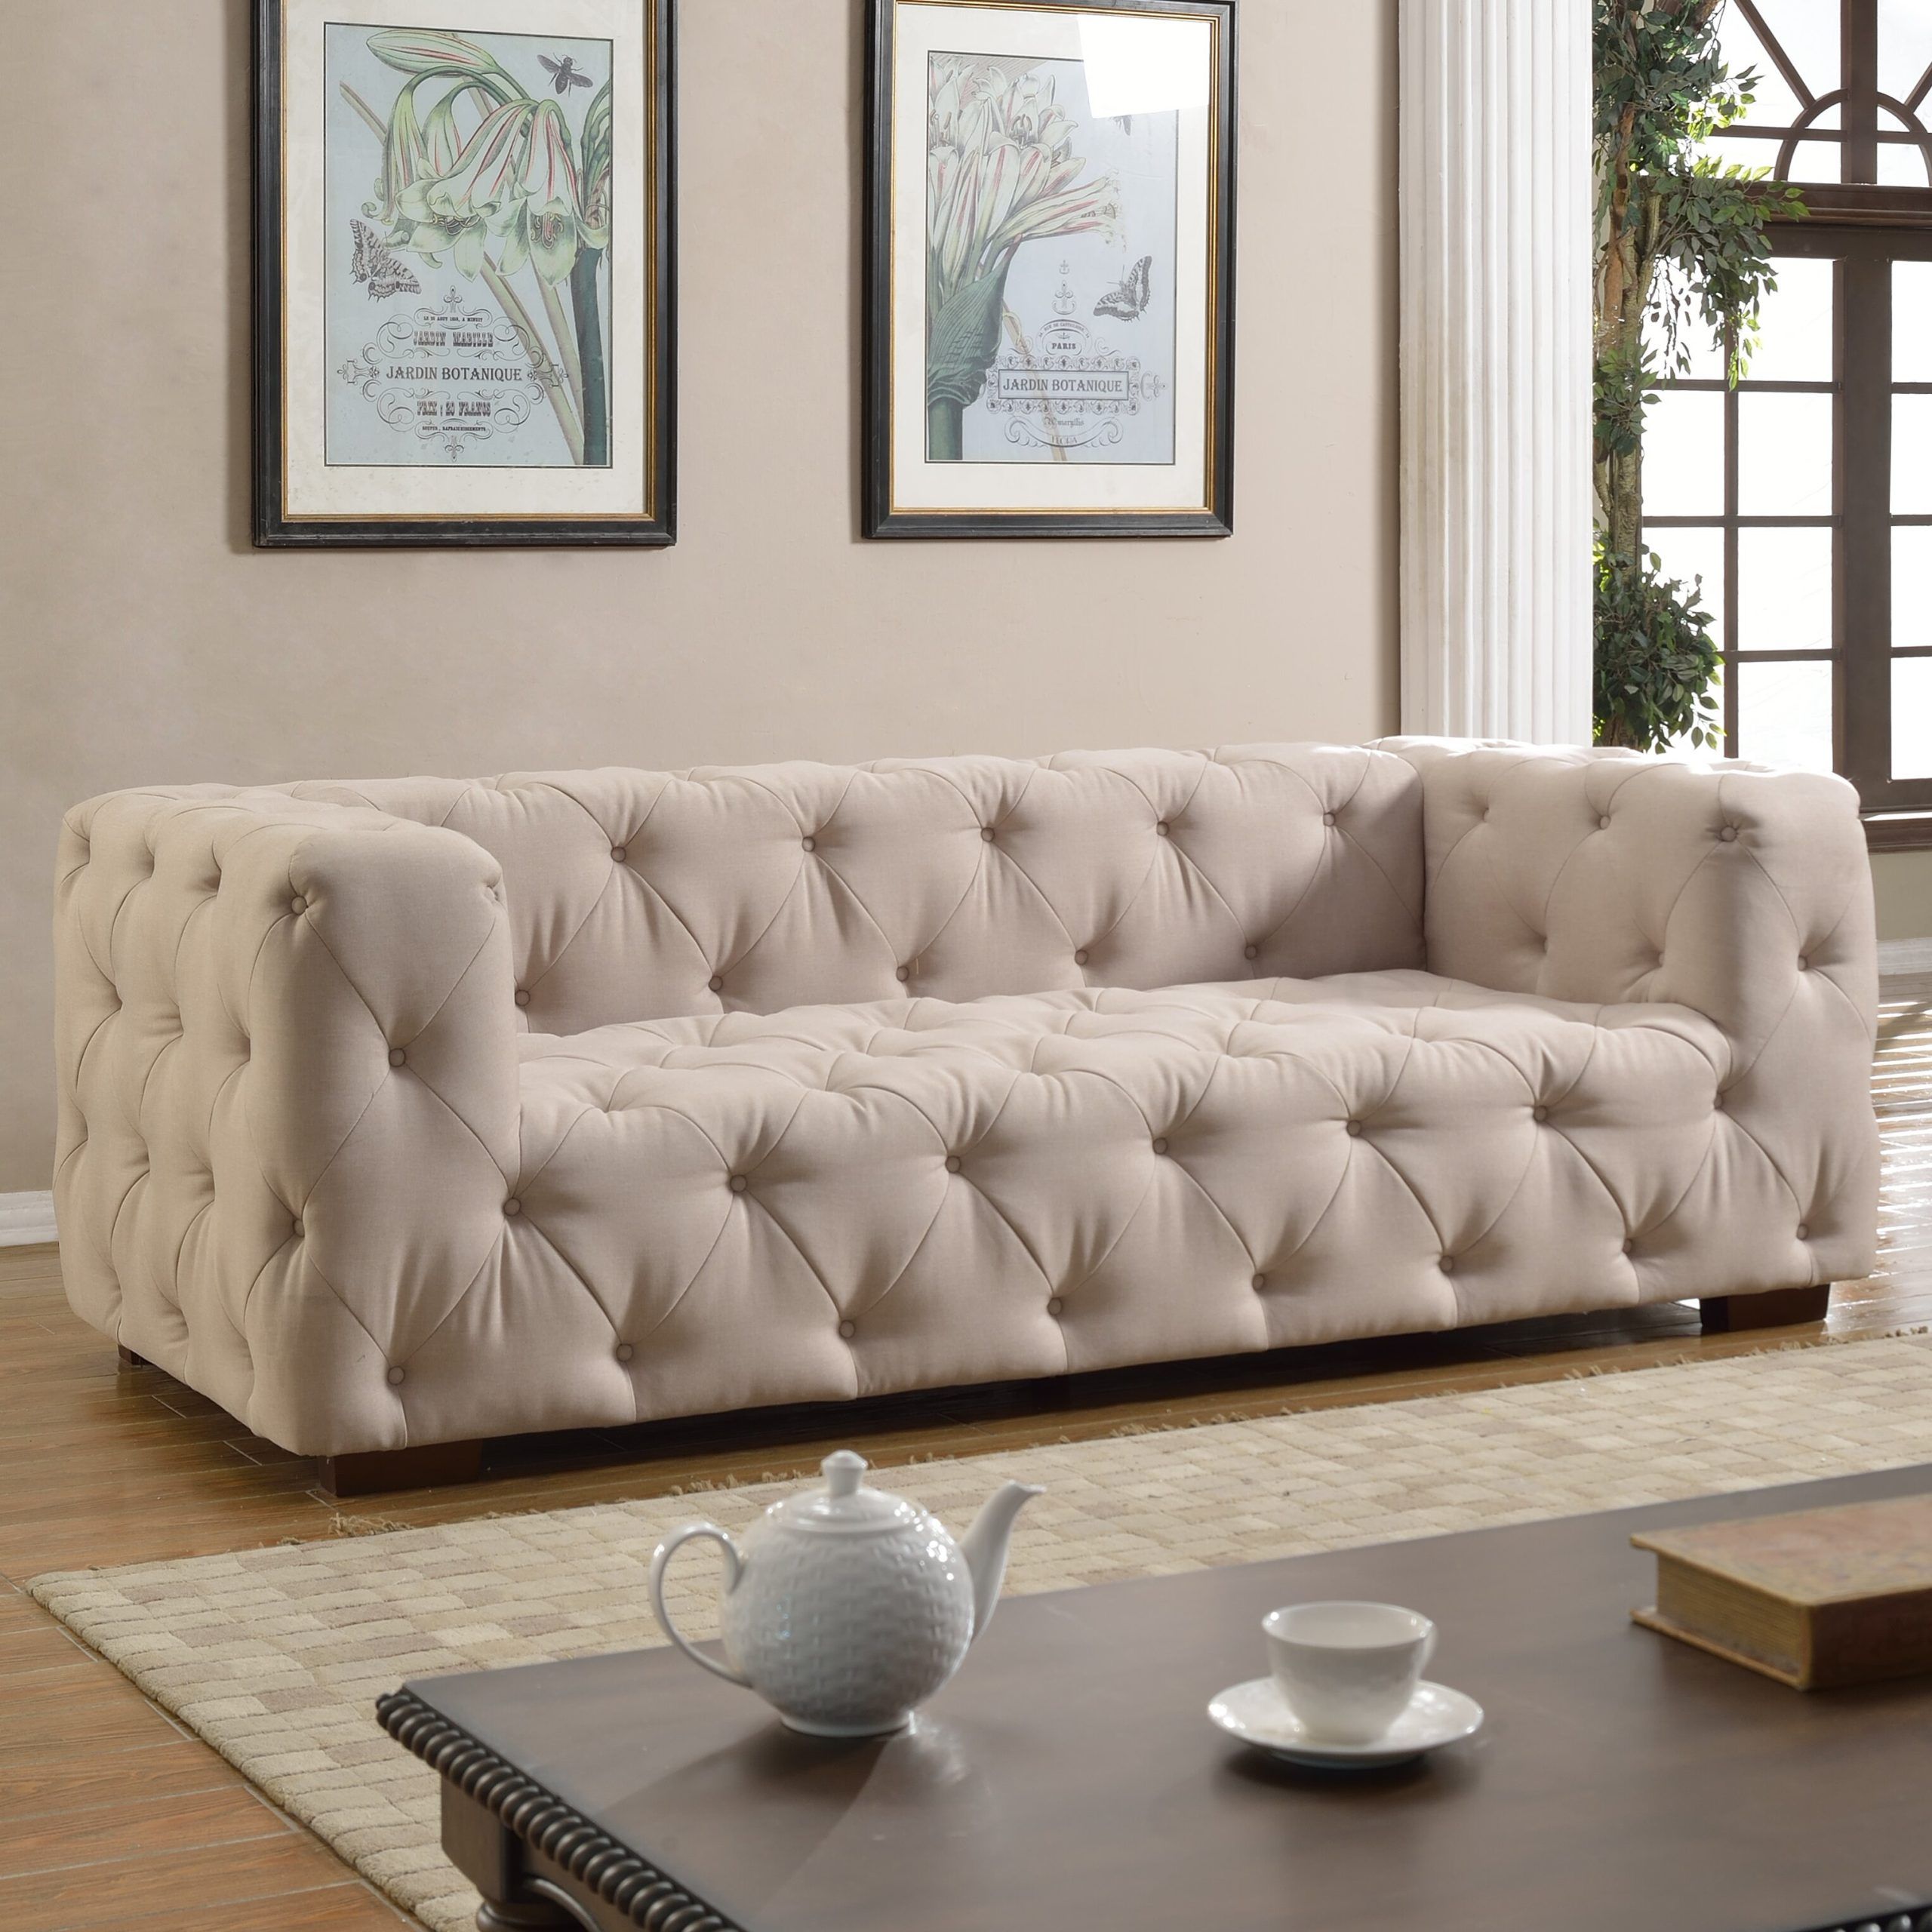 Tufted Large Sofa | Wayfair For Tufted Upholstered Sofas (View 18 of 20)